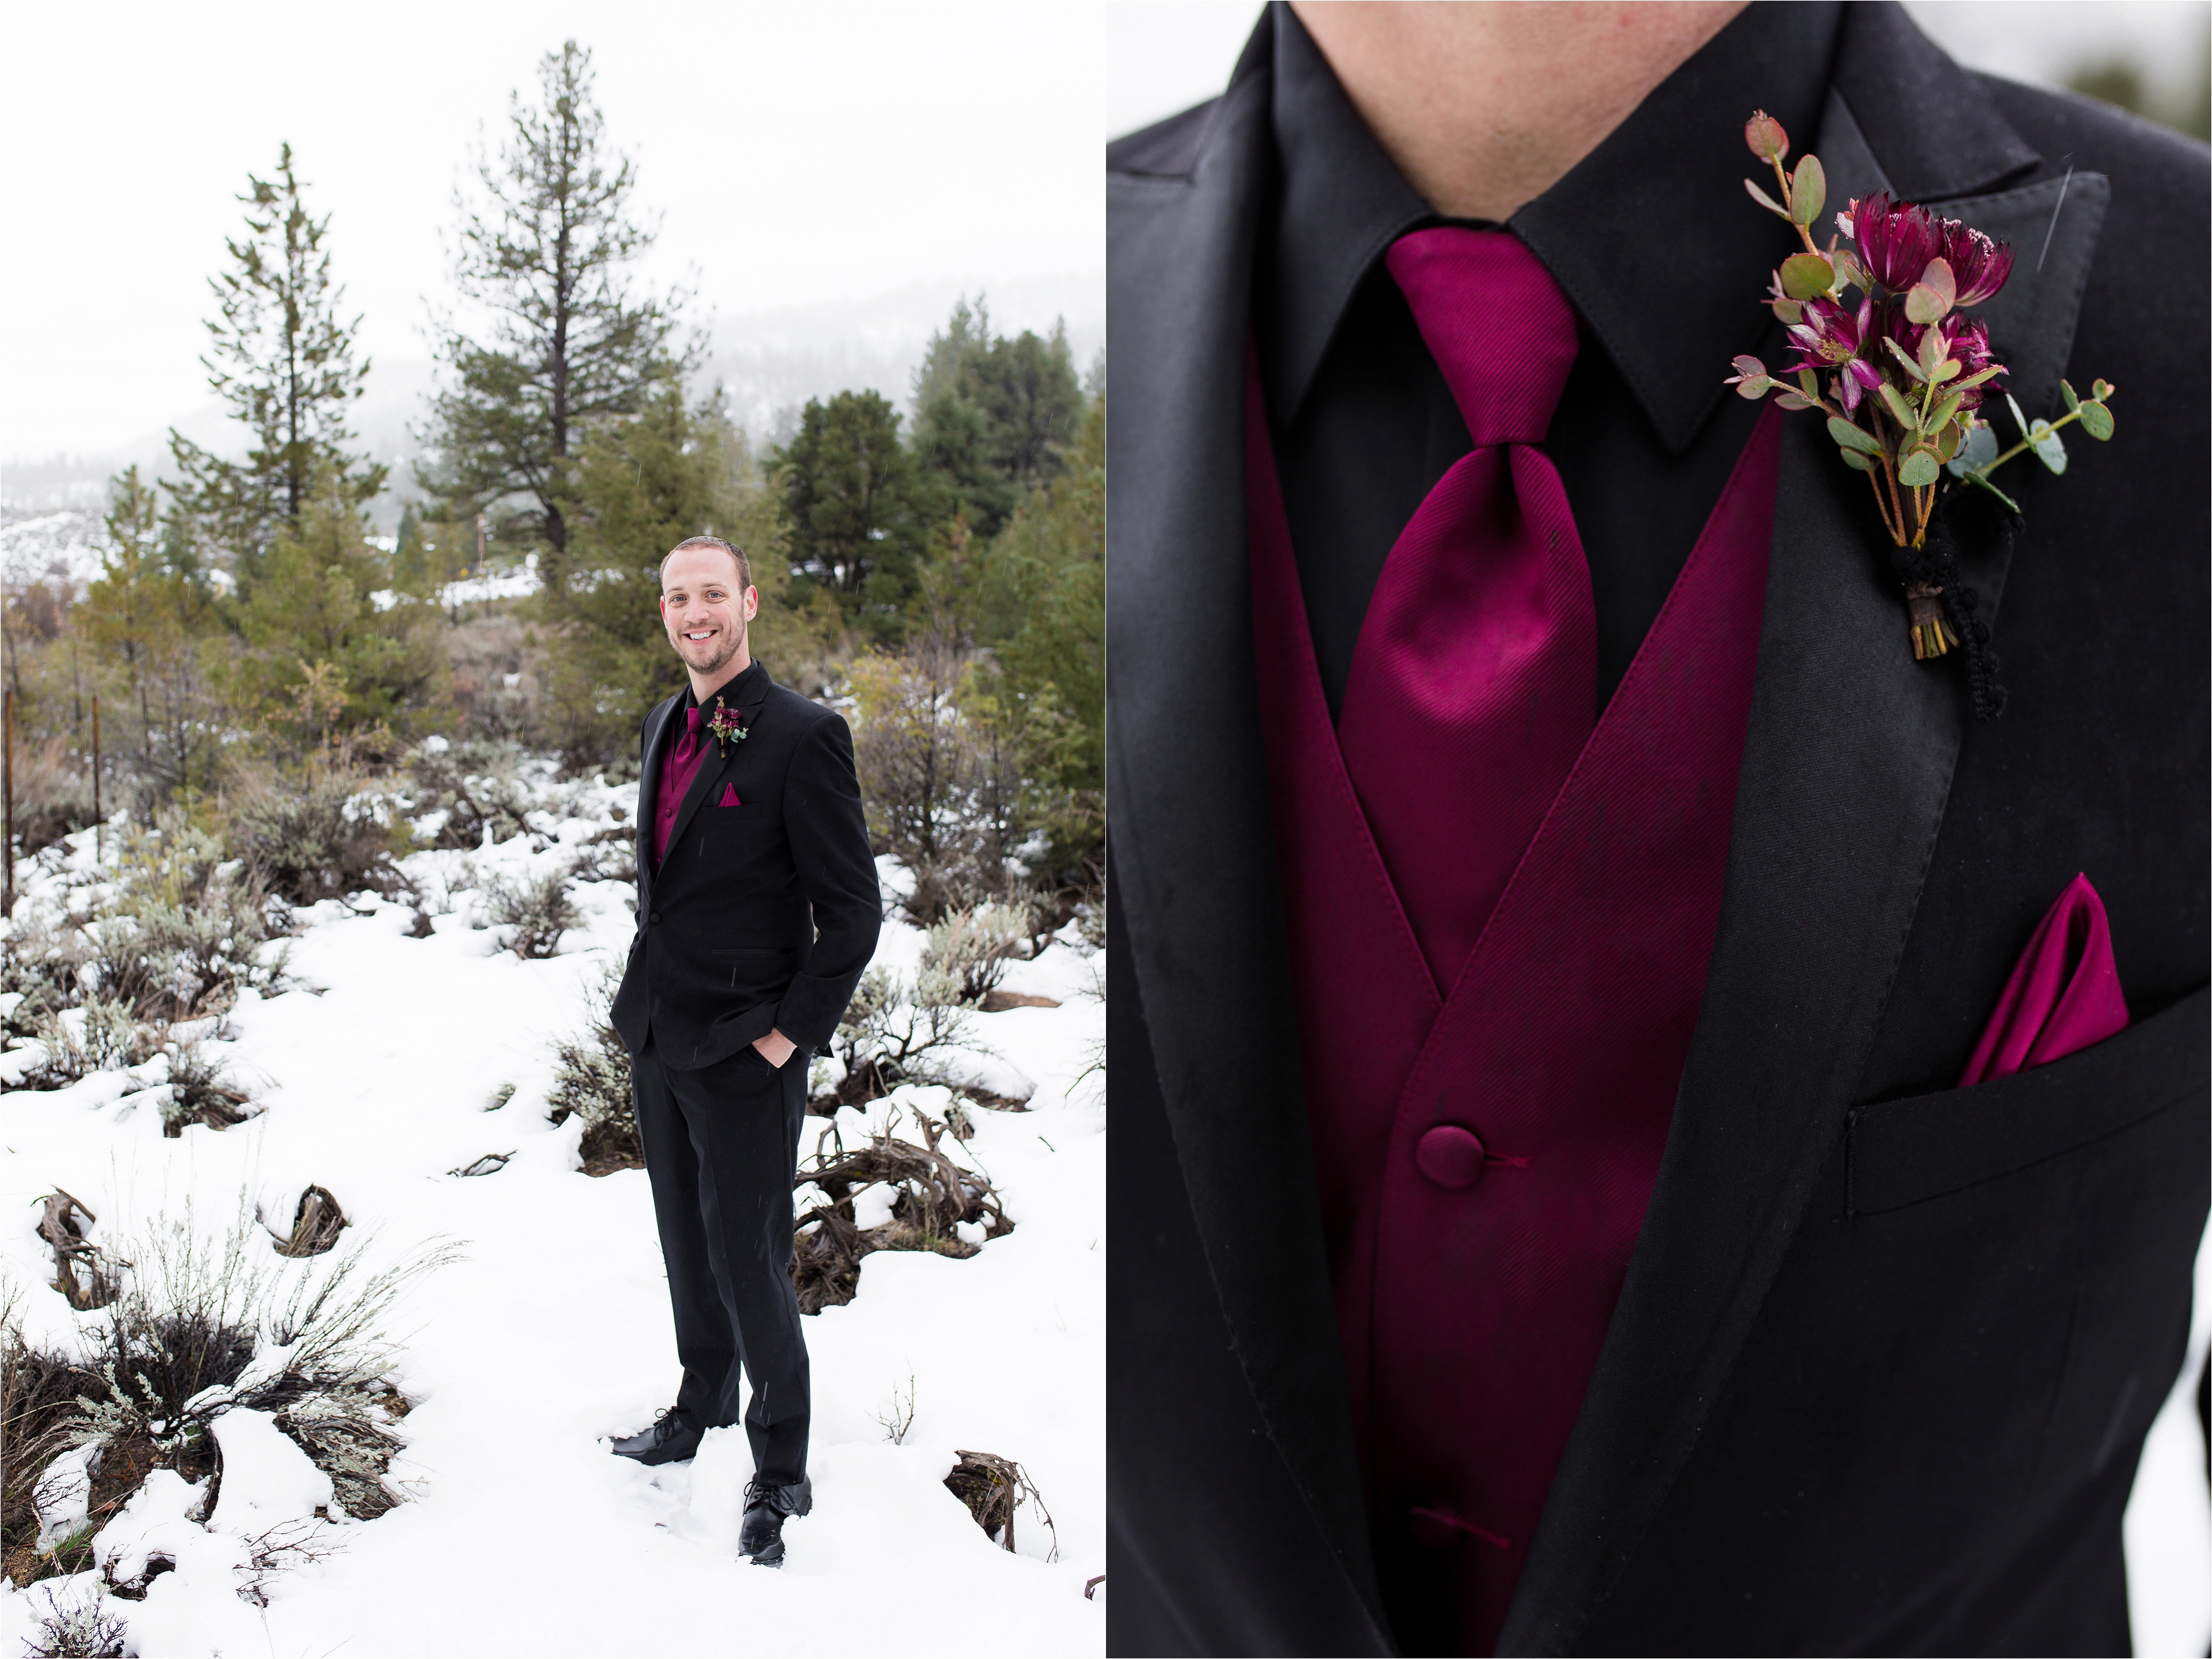 Groom in black tuxedo with burgundy tie, pocket square and boutonniere 